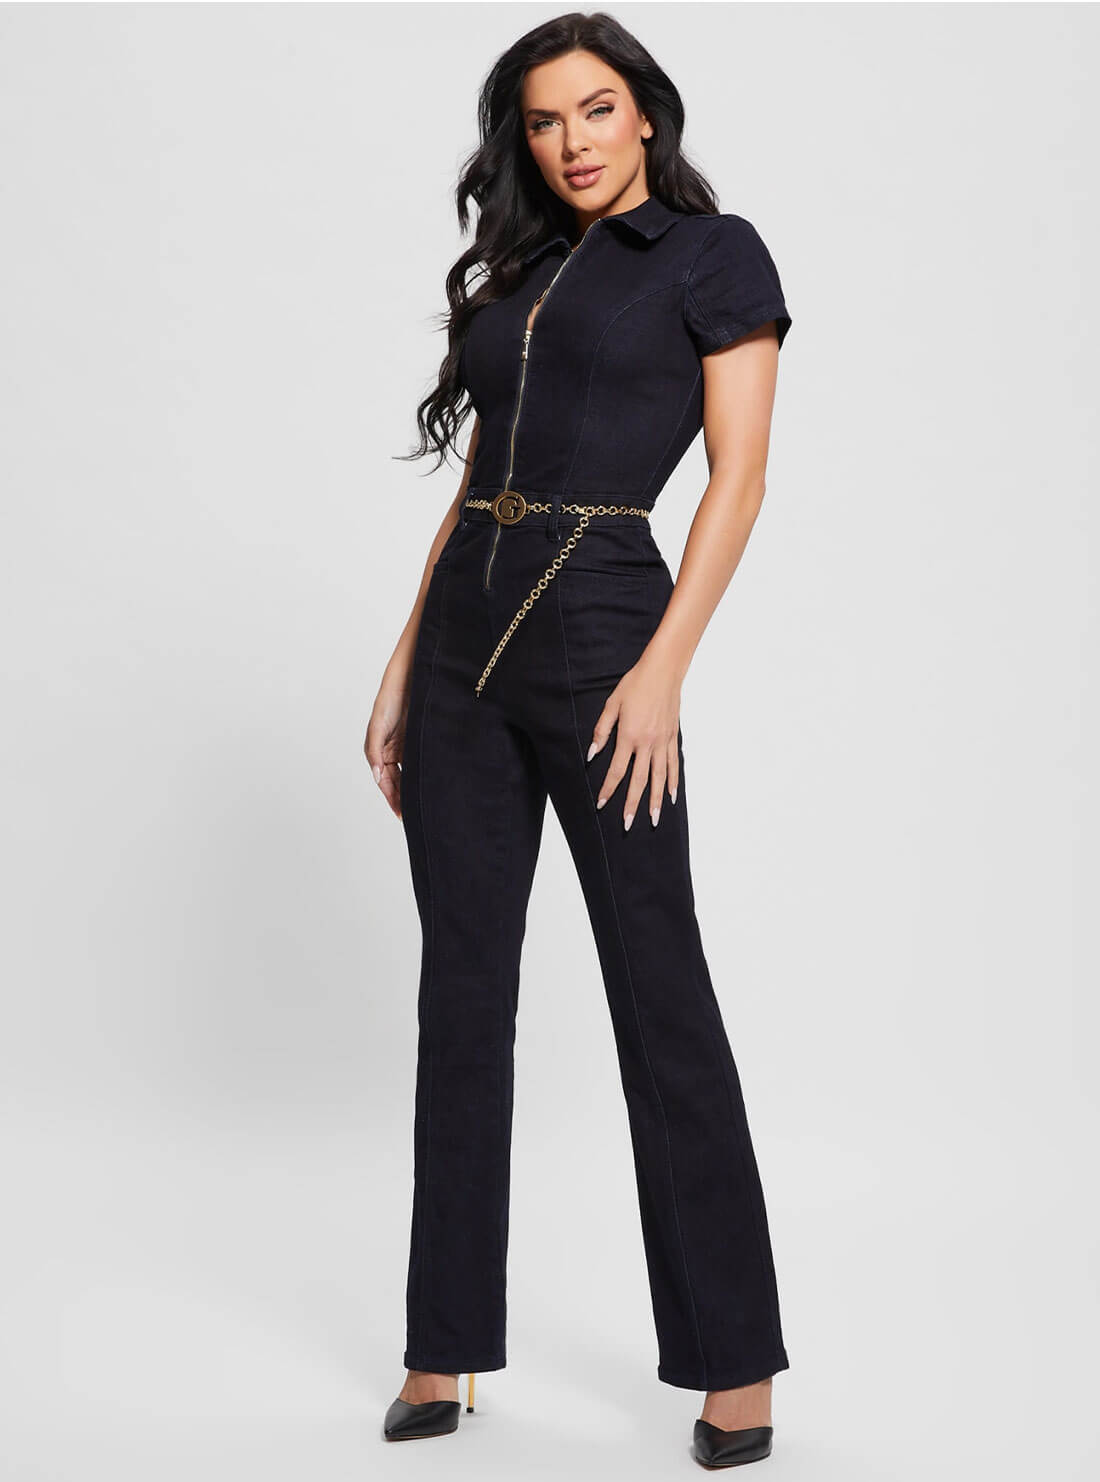 Dark Blue Ember Flare Denim Jumpsuit In Le Clique Wash | GUESS Women's Apparel | full view